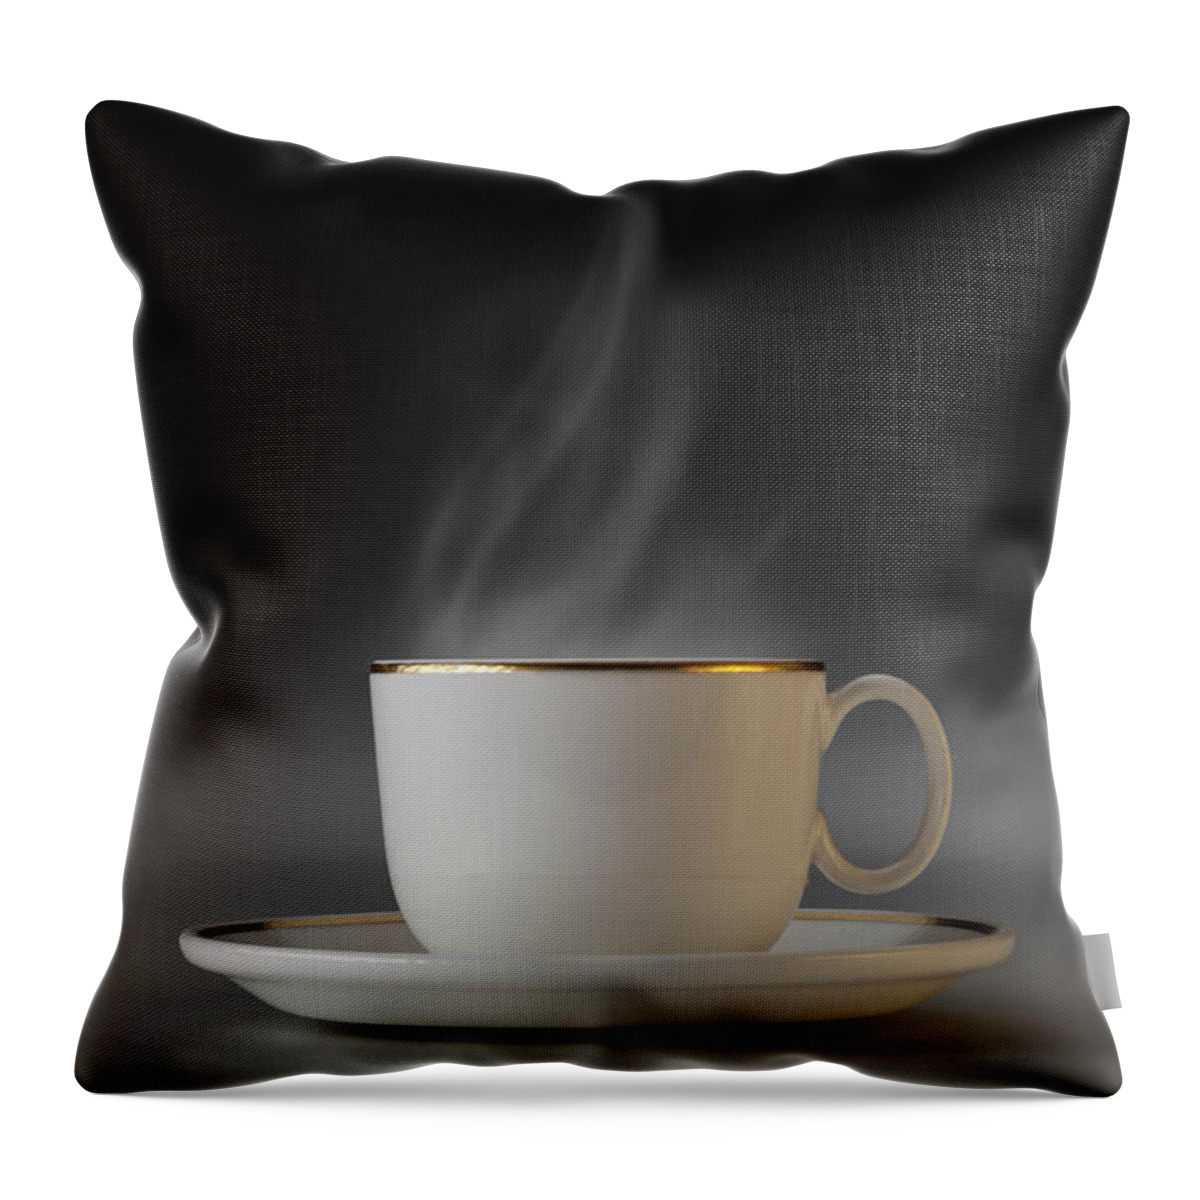 Black Background Throw Pillow featuring the photograph Cup With Steam by Bjorn Holland